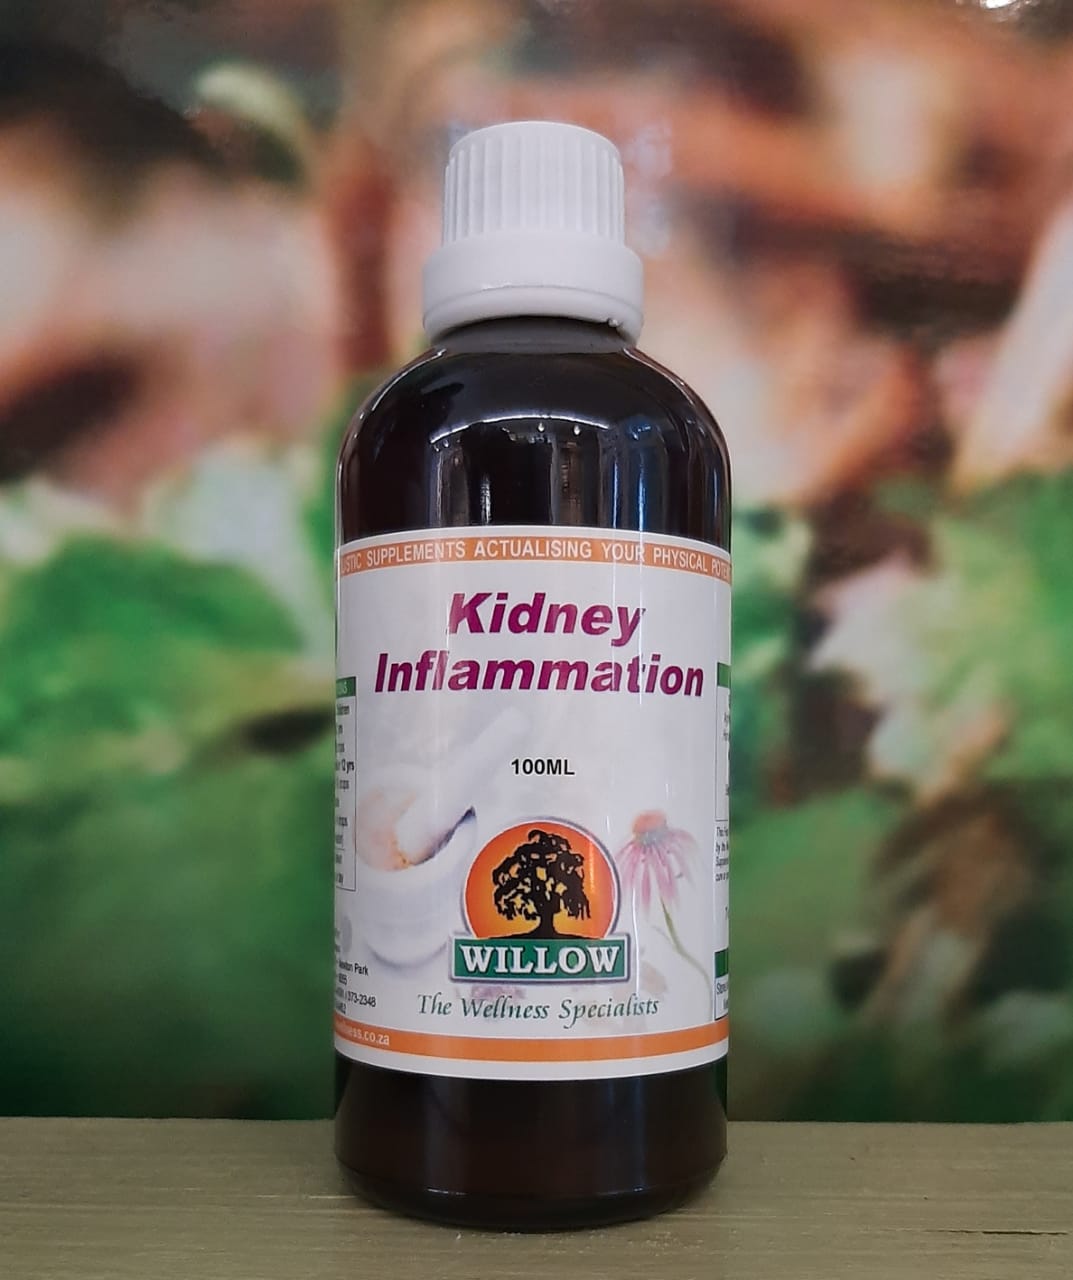 Willow Kidney Inflammation drops 100ml